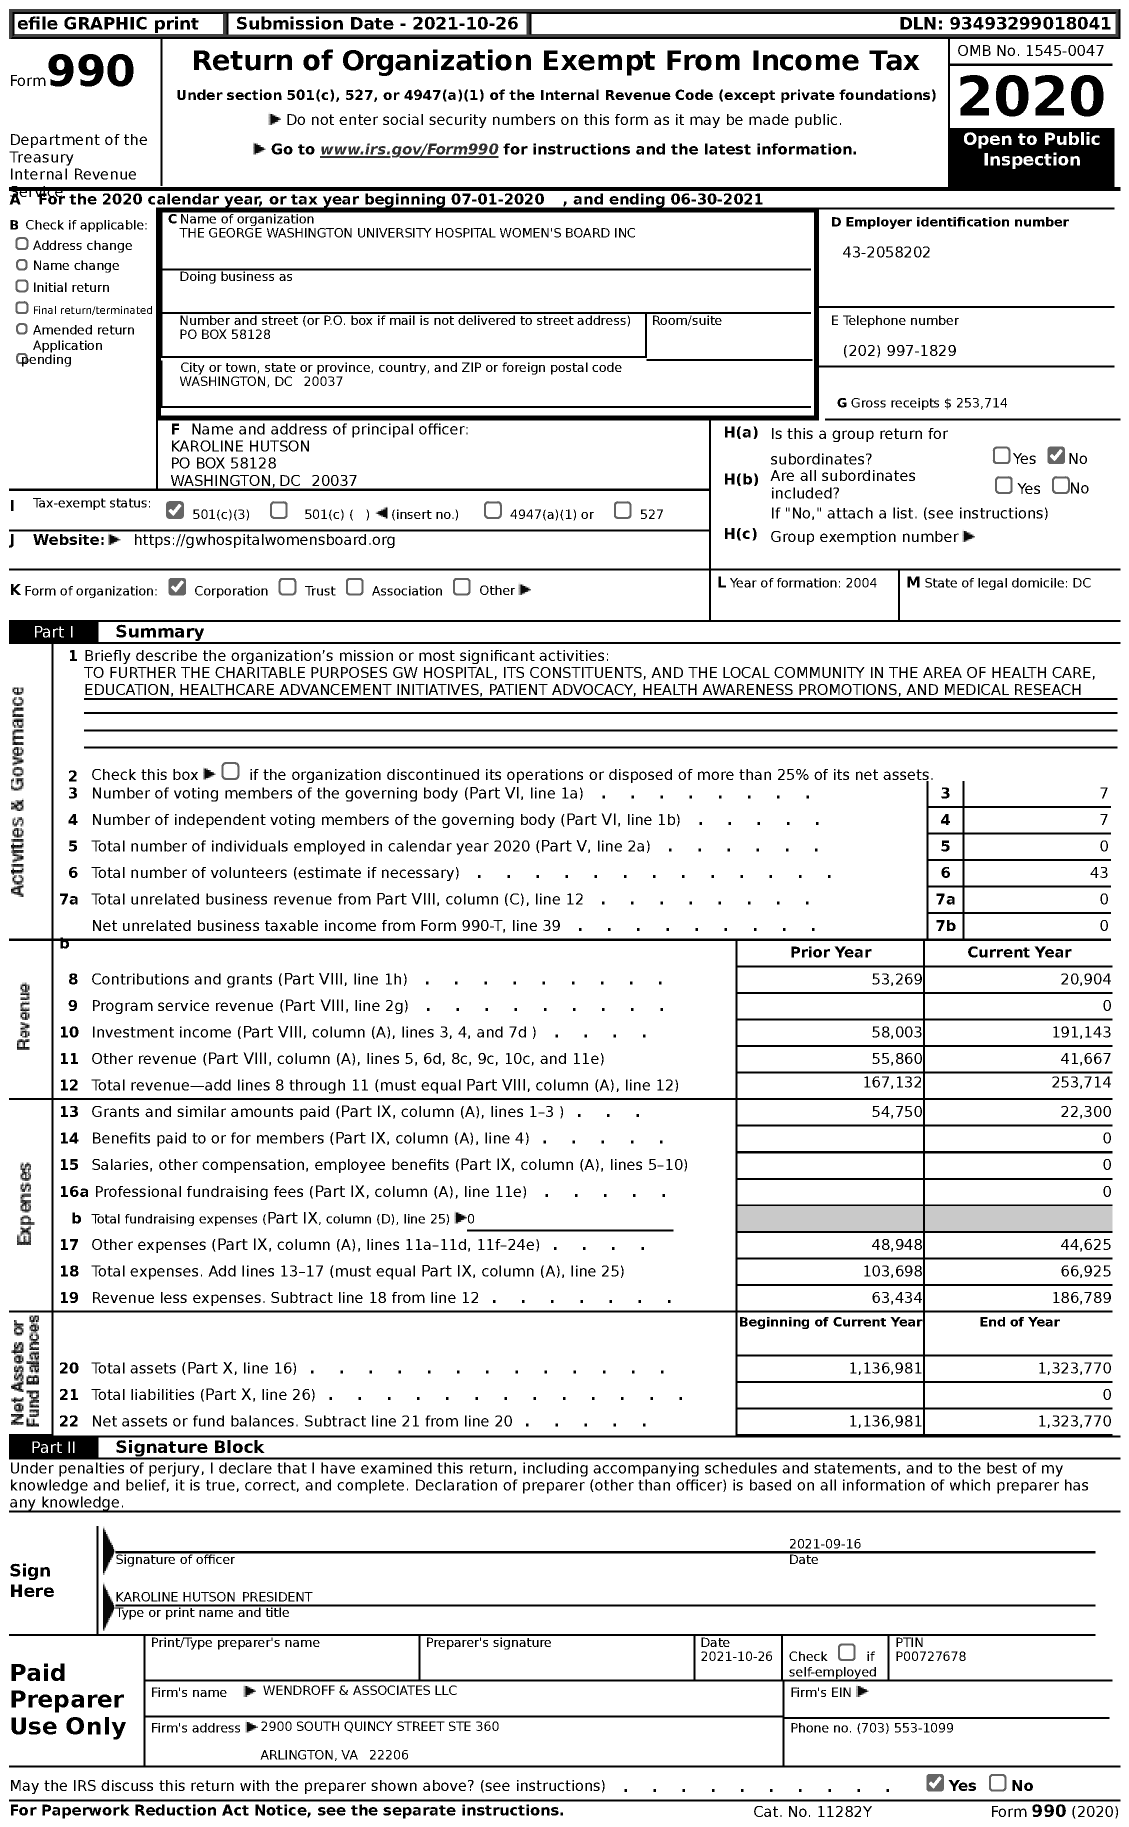 Image of first page of 2020 Form 990 for The George Washington University Hospital Women's Board